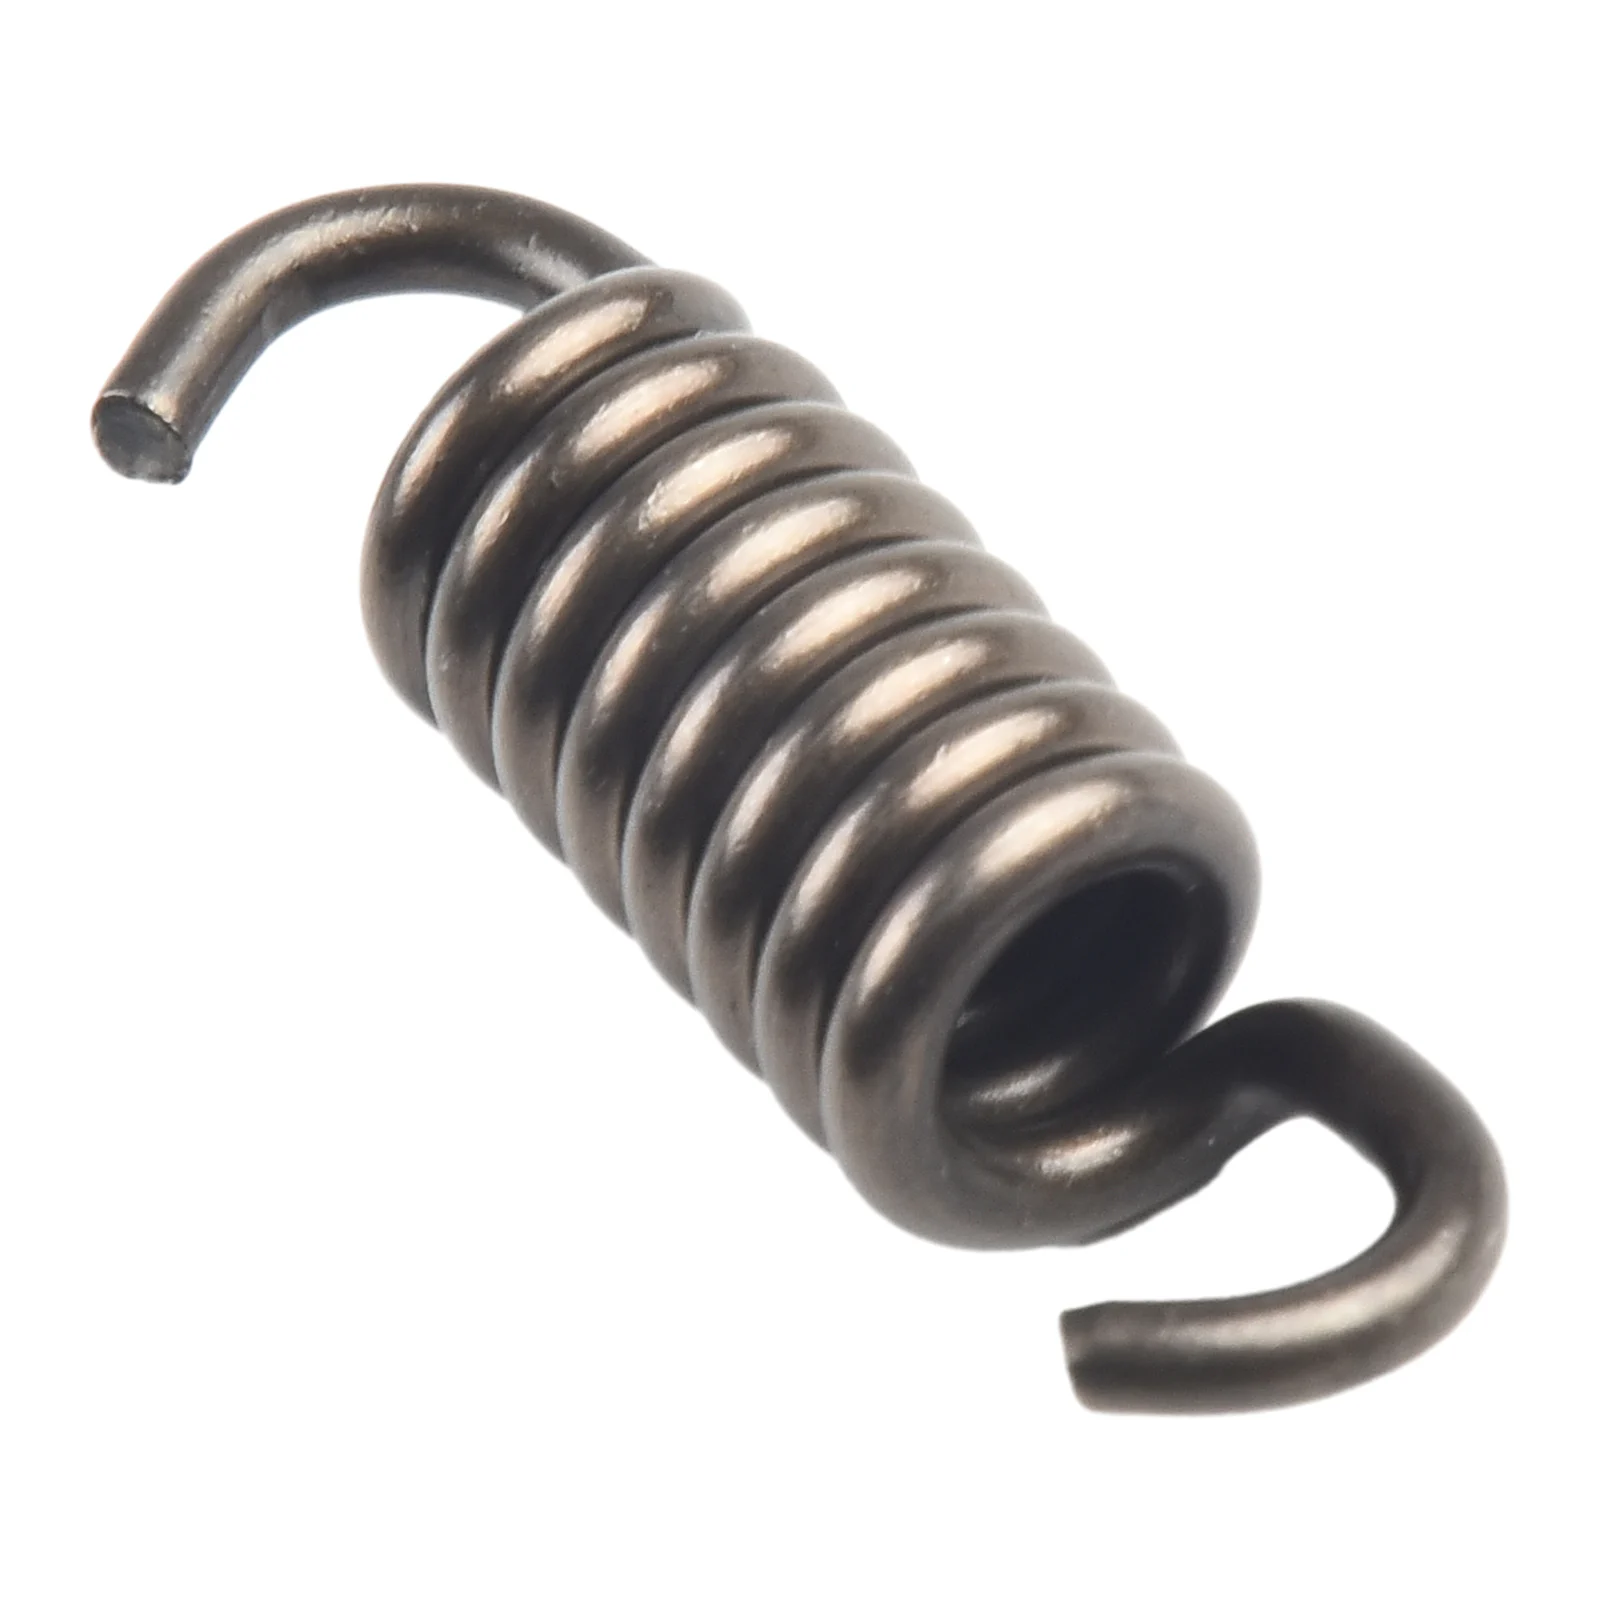 1PCS Clutch Spring For Various 43cc 52cc Strimmers Trimmer  Brushcutters Garden Power Tool Accessories